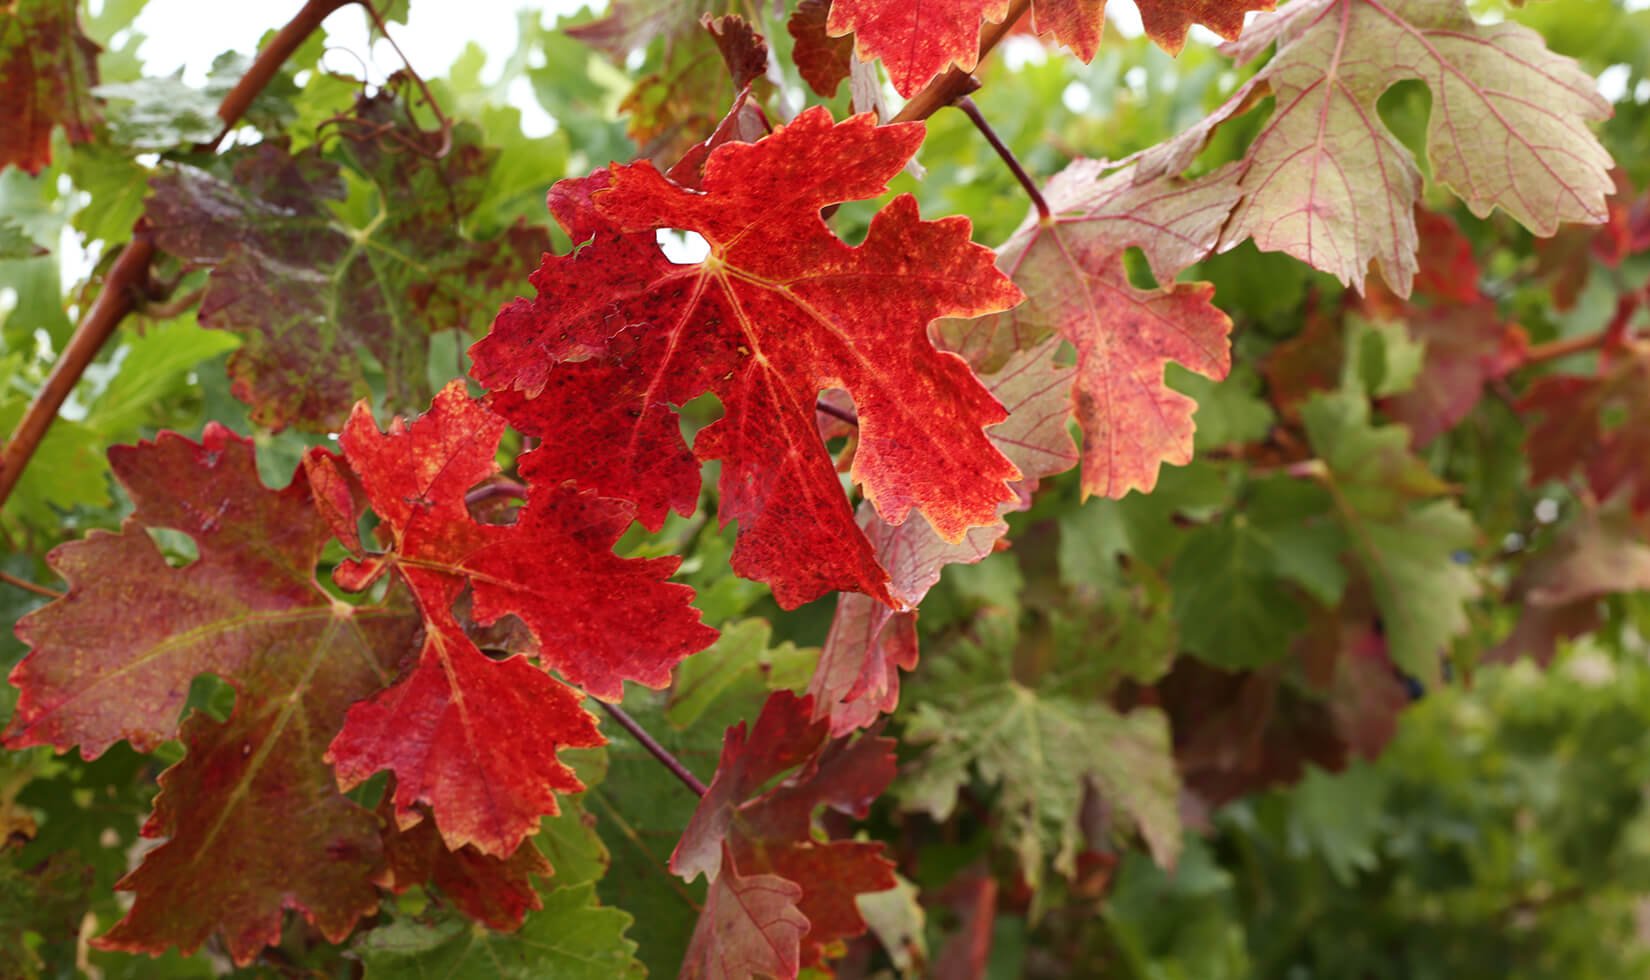 Grapevine leaves turning red around other green leaves due to red blotch